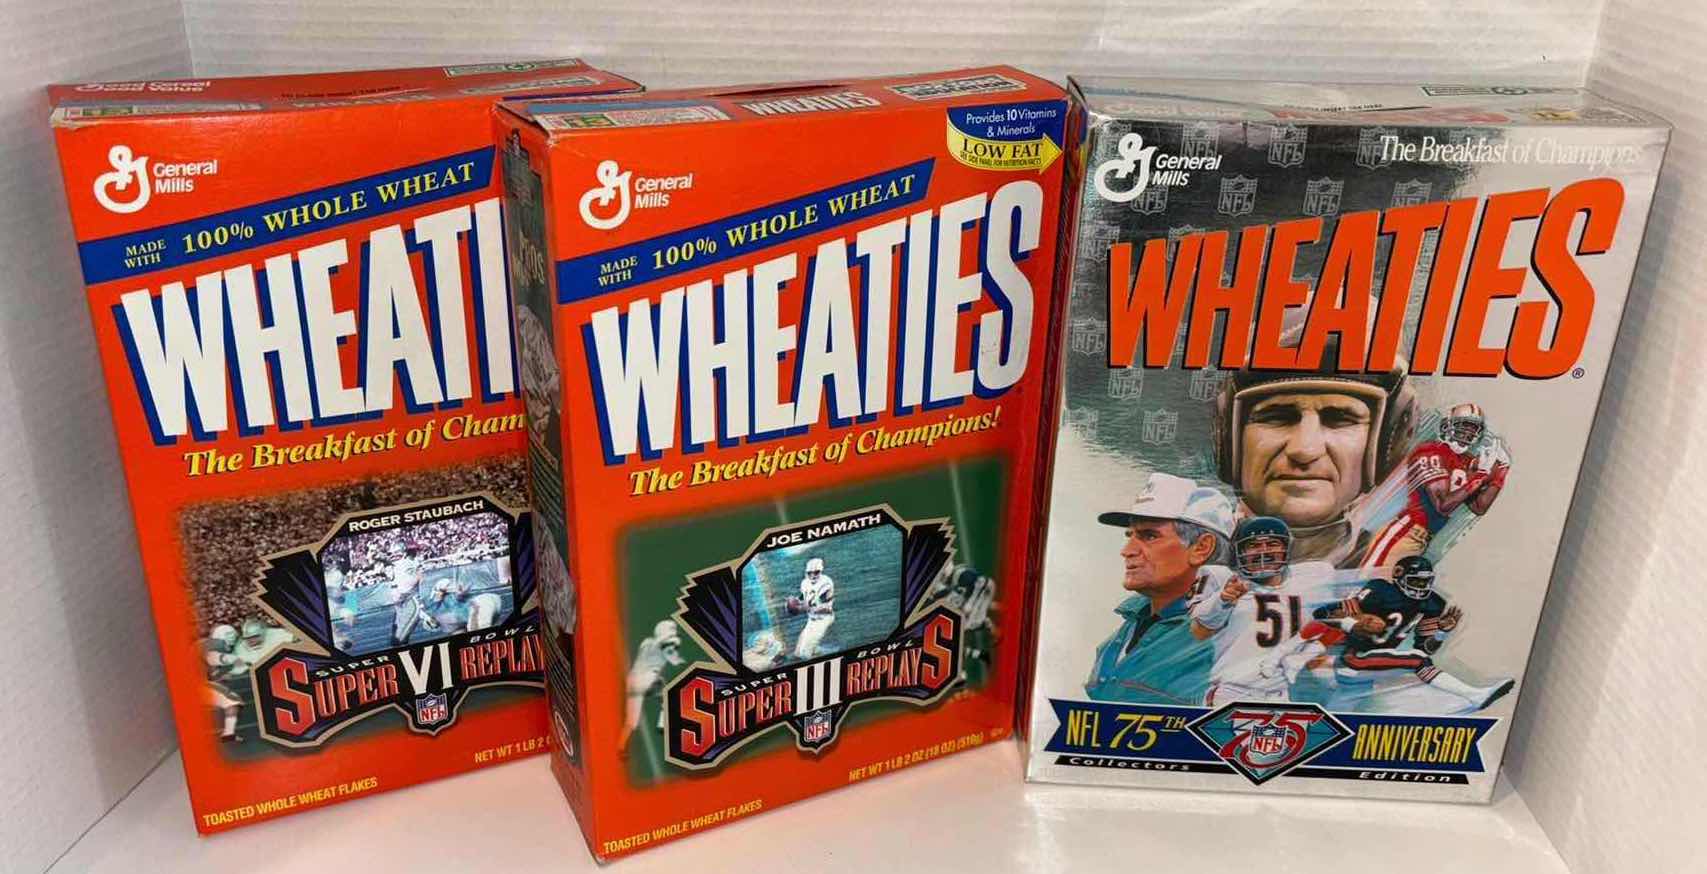 Photo 1 of 3-GENERAL MILLS WHEATIES CEREAL COLLECTORS BOXES, 3D HOLOGRAM SUPER BOWLS & NFL 75TH ANNIVERSARY